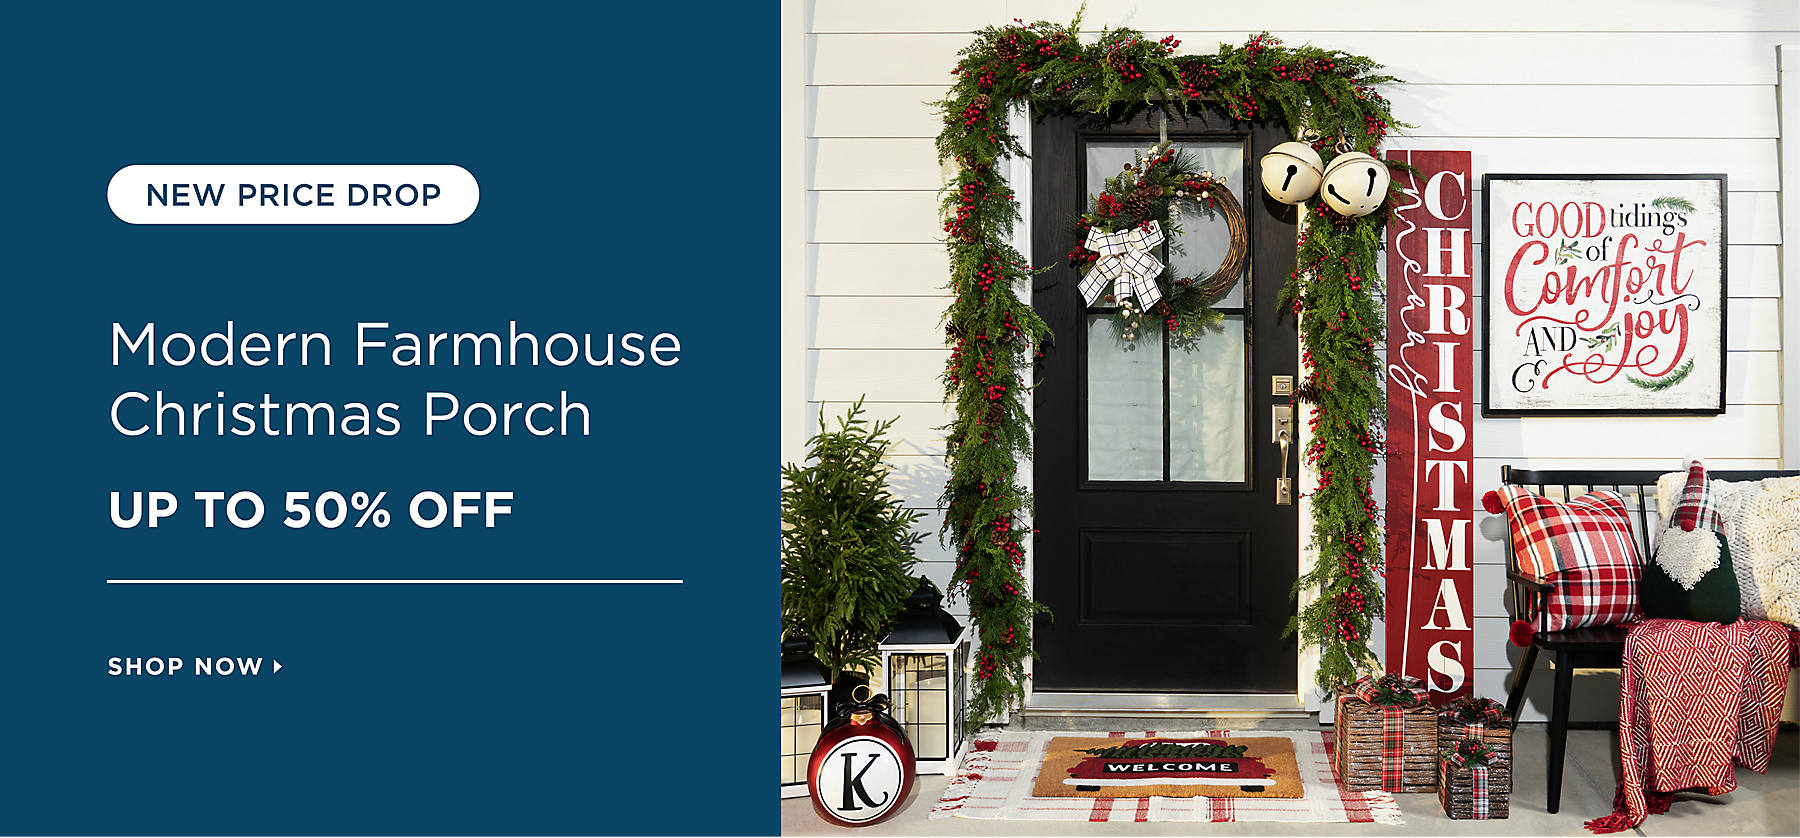 This Weekend Only Modern Farmhouse Christmas Porch Up to 50% Off Shop Now